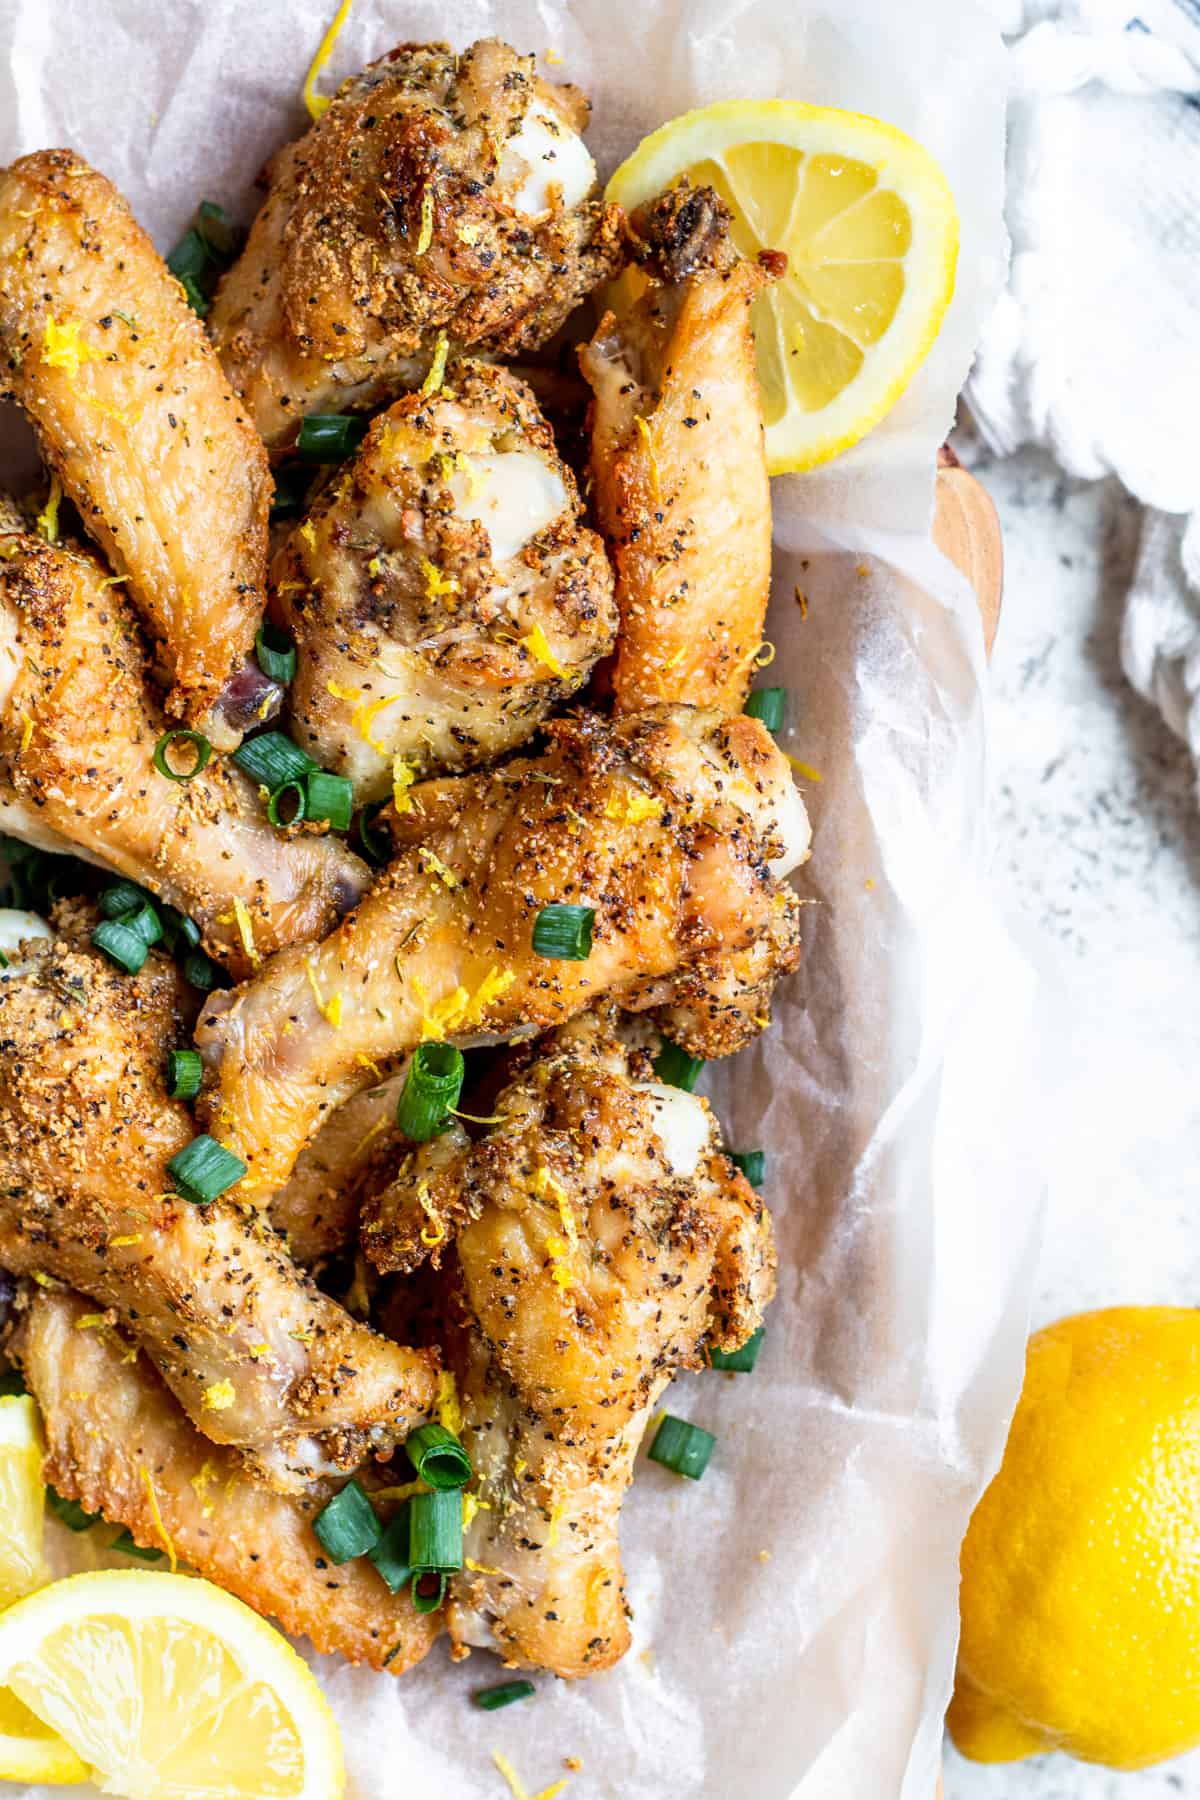 Overhead shot of chicken wings with lemon slices.